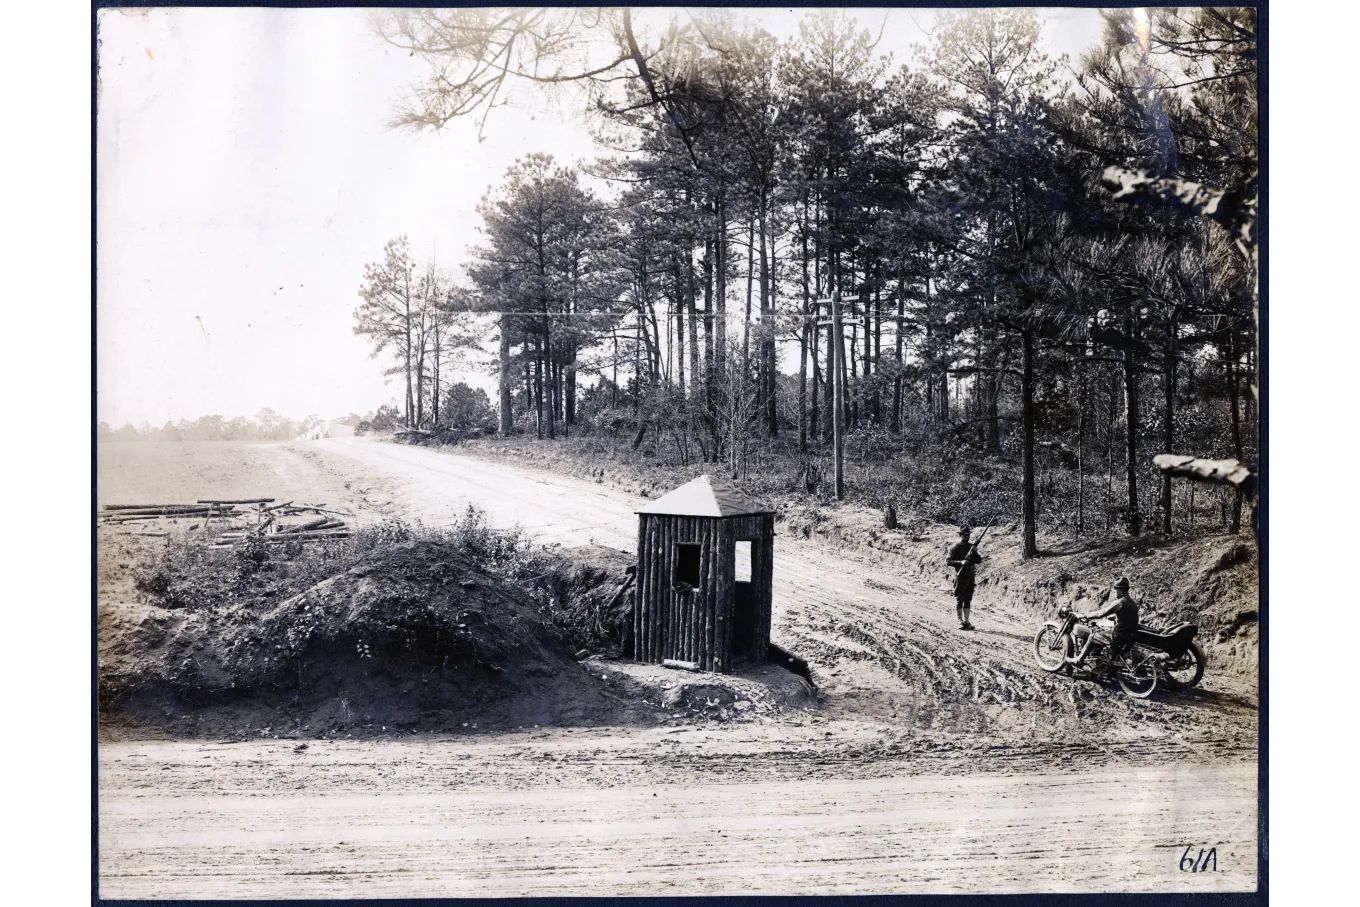 Entrance to Emerson Flying Field, Columbia, S.C.